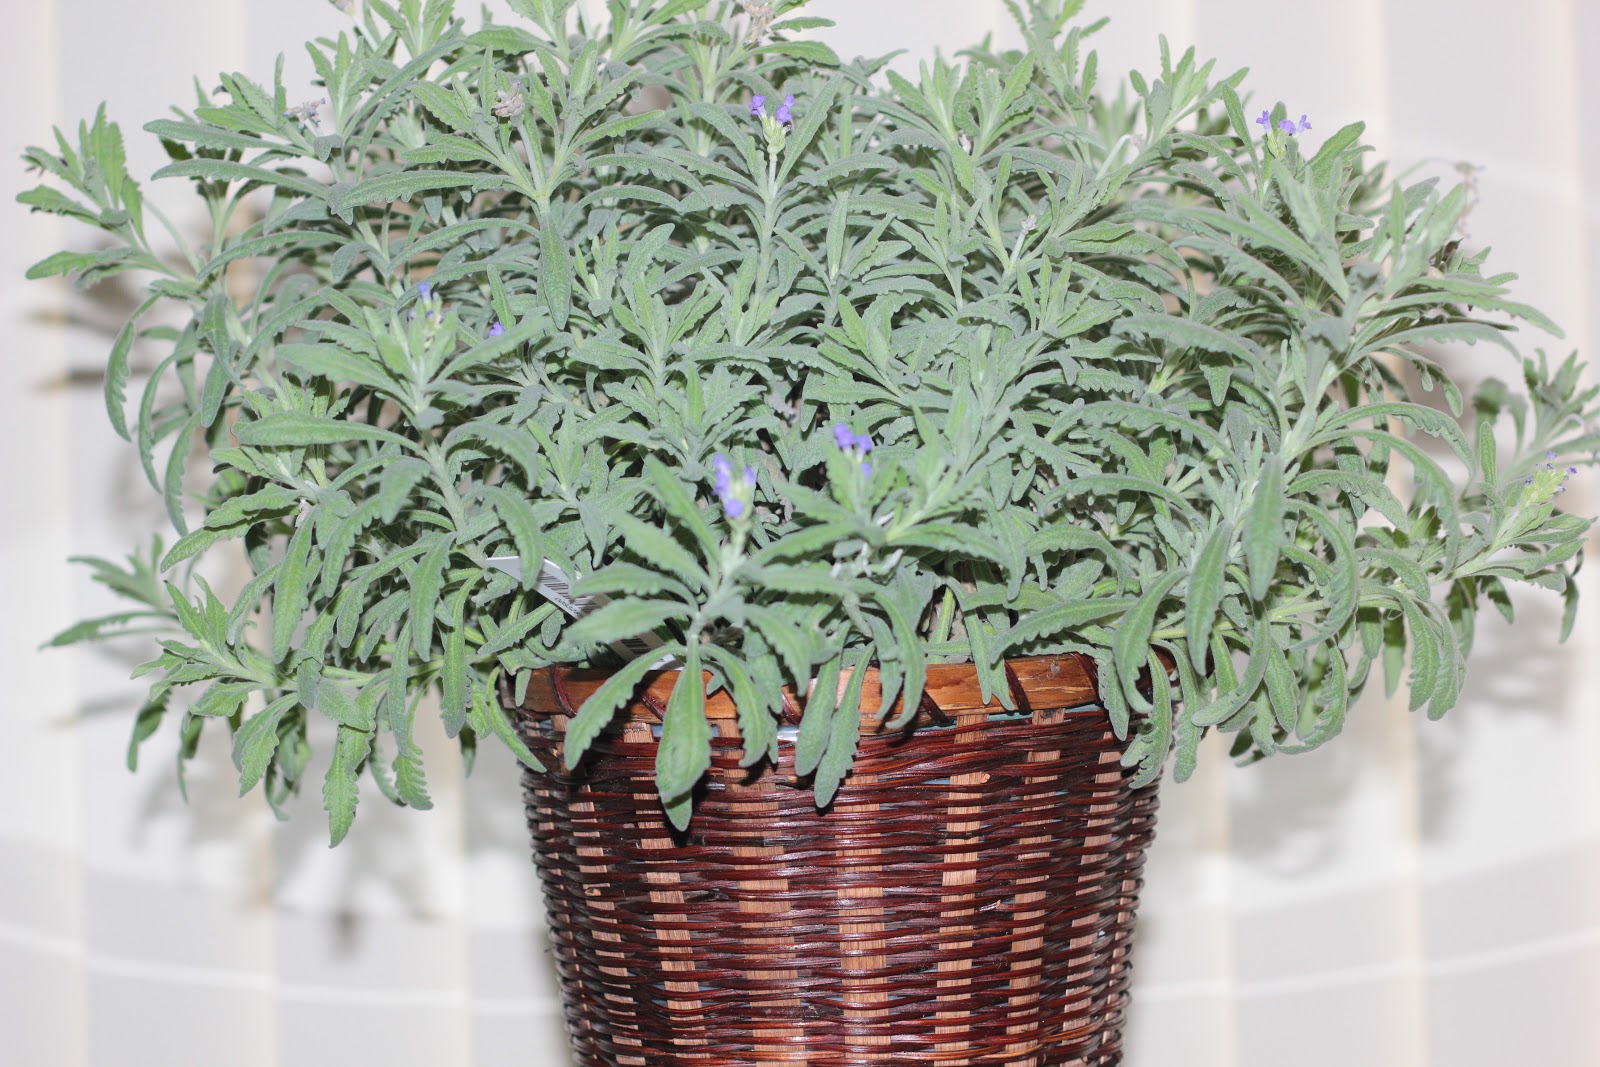 Lavender as a houseplant cleans the air and adds a calming, relaxing scent to the indoor environment for stress relief..